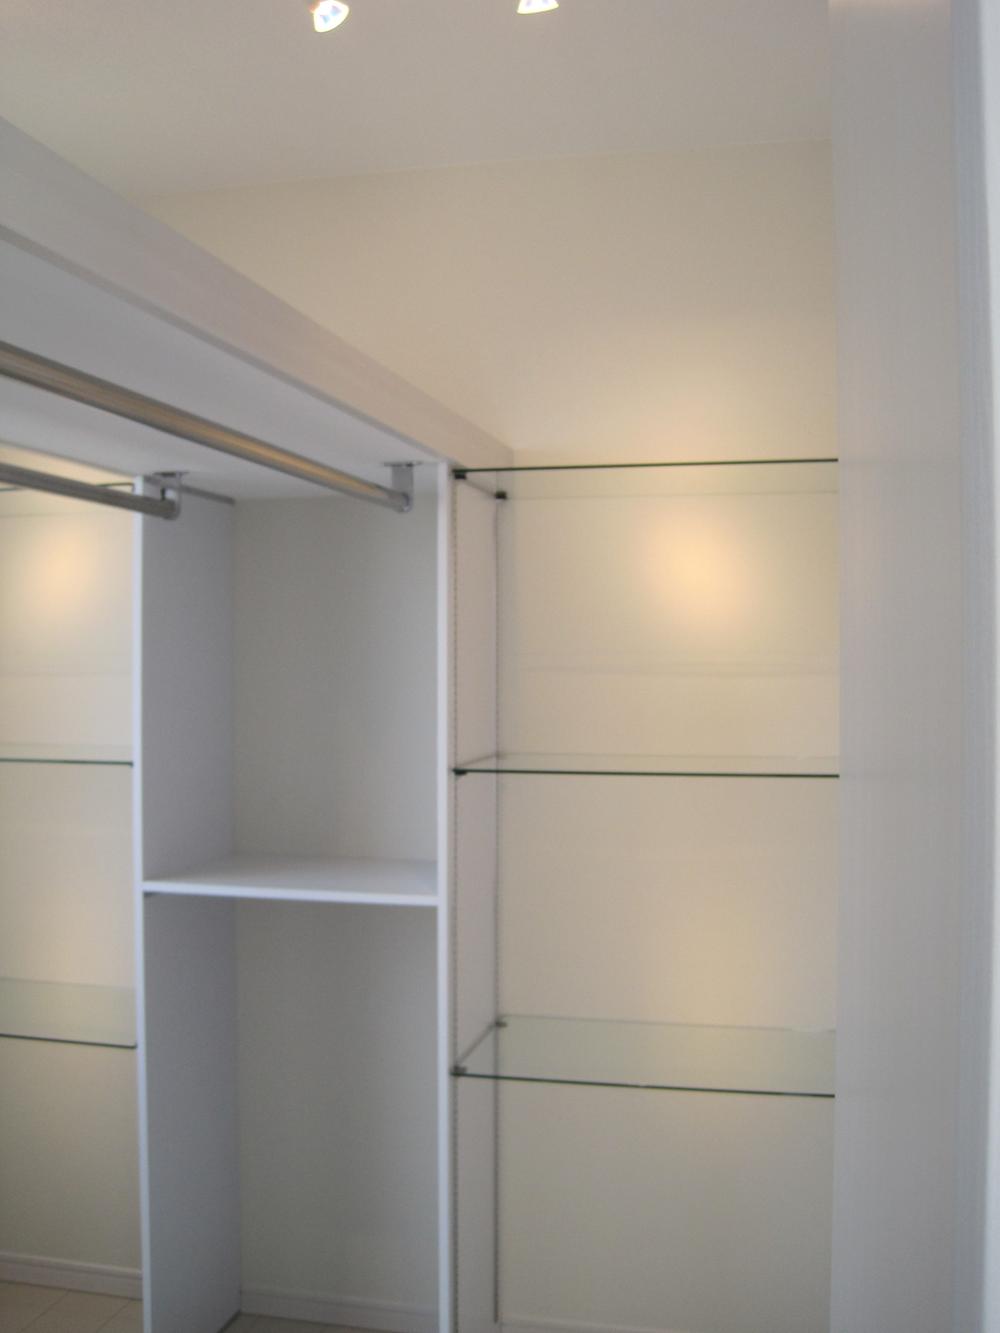 Building plan example (introspection photo). Fashionable and convenient walk-in closet